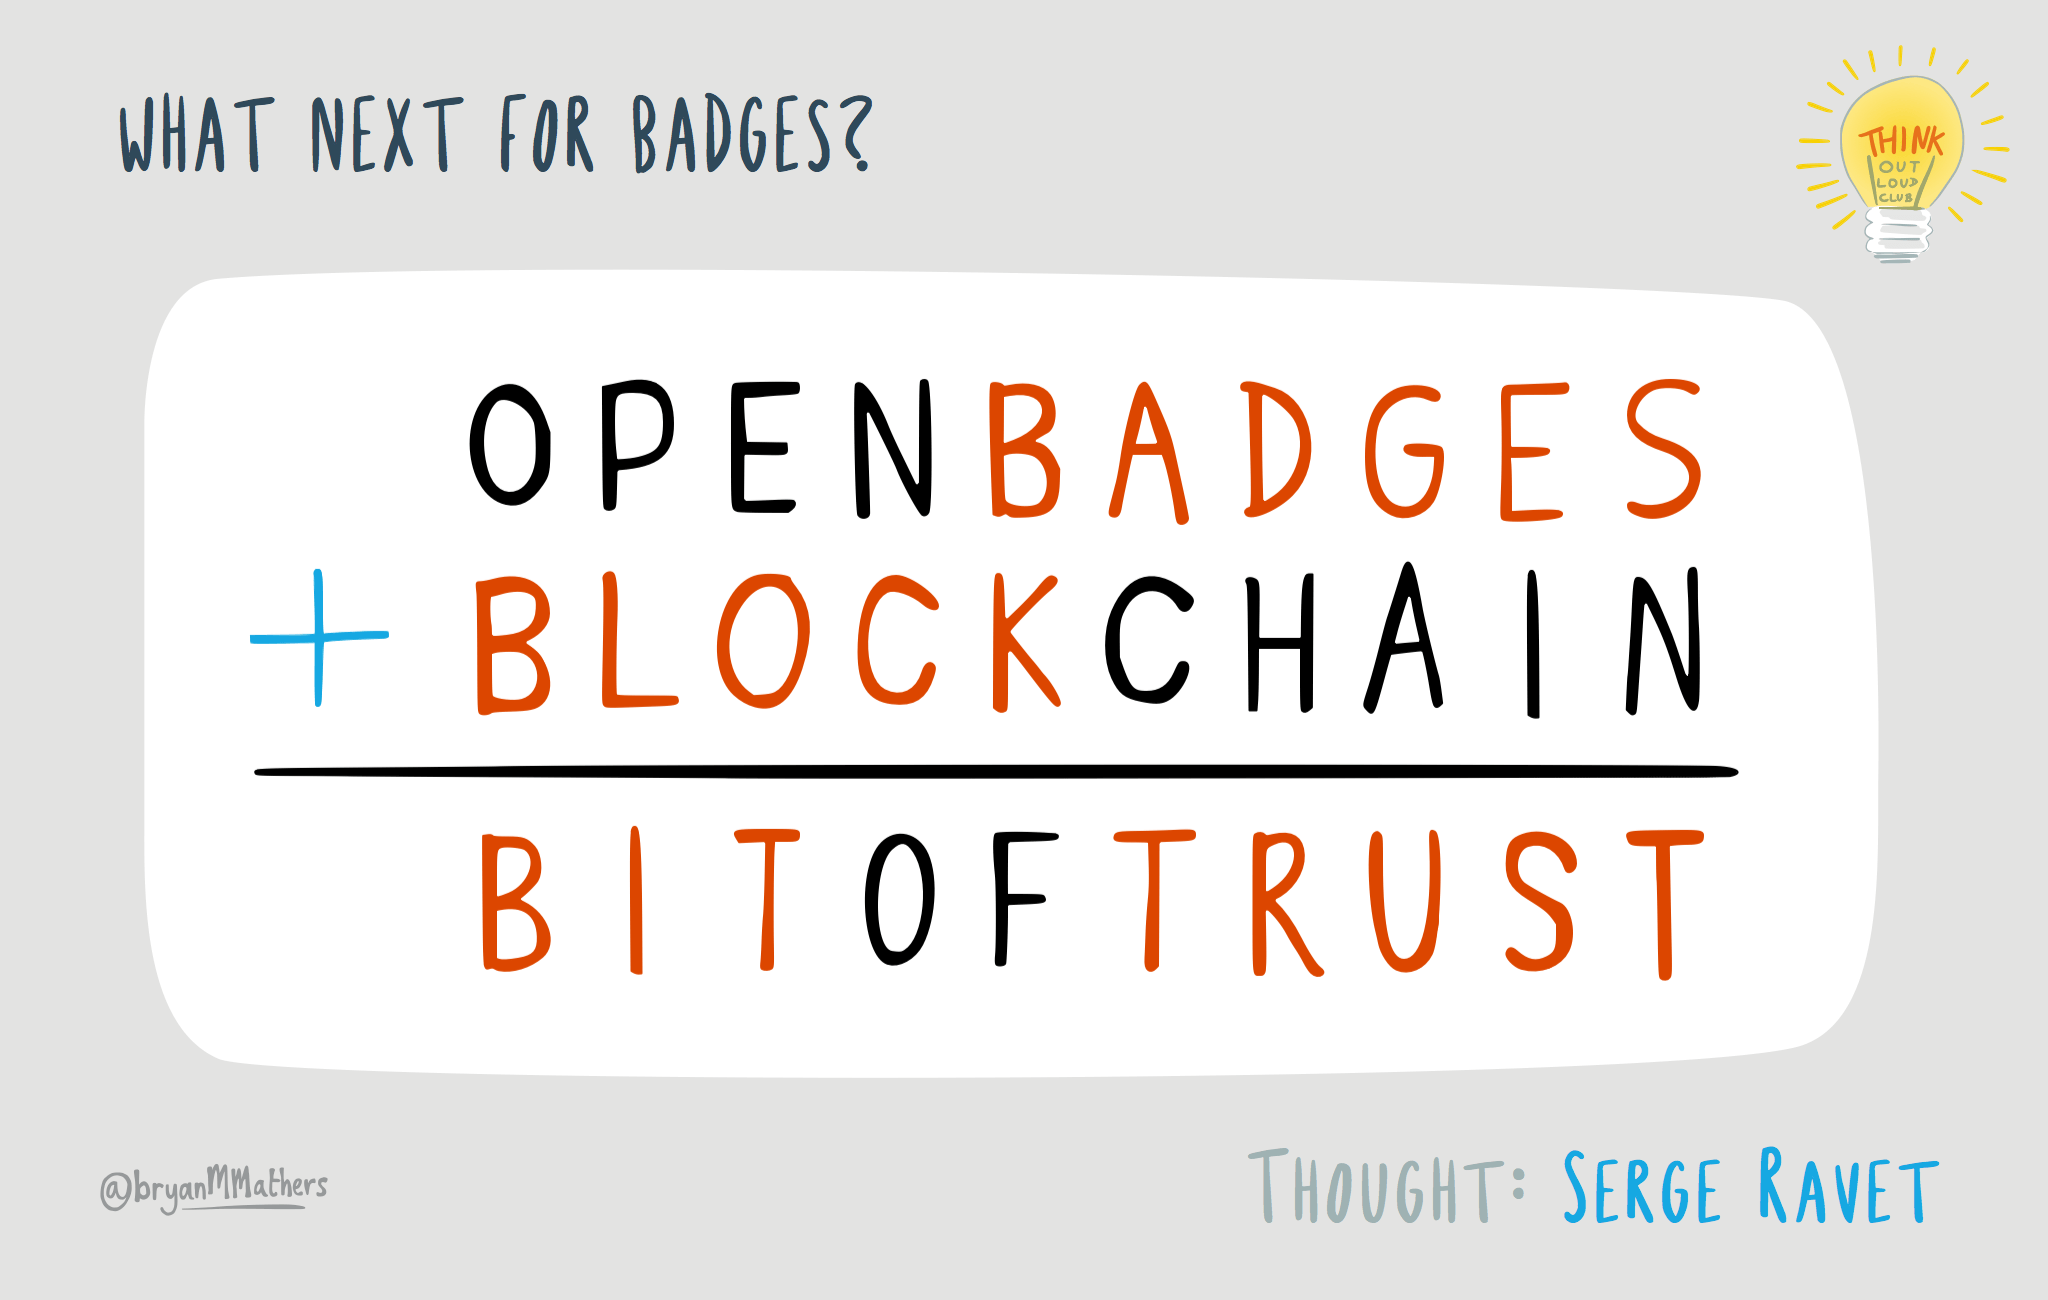 What next for Open Badges?